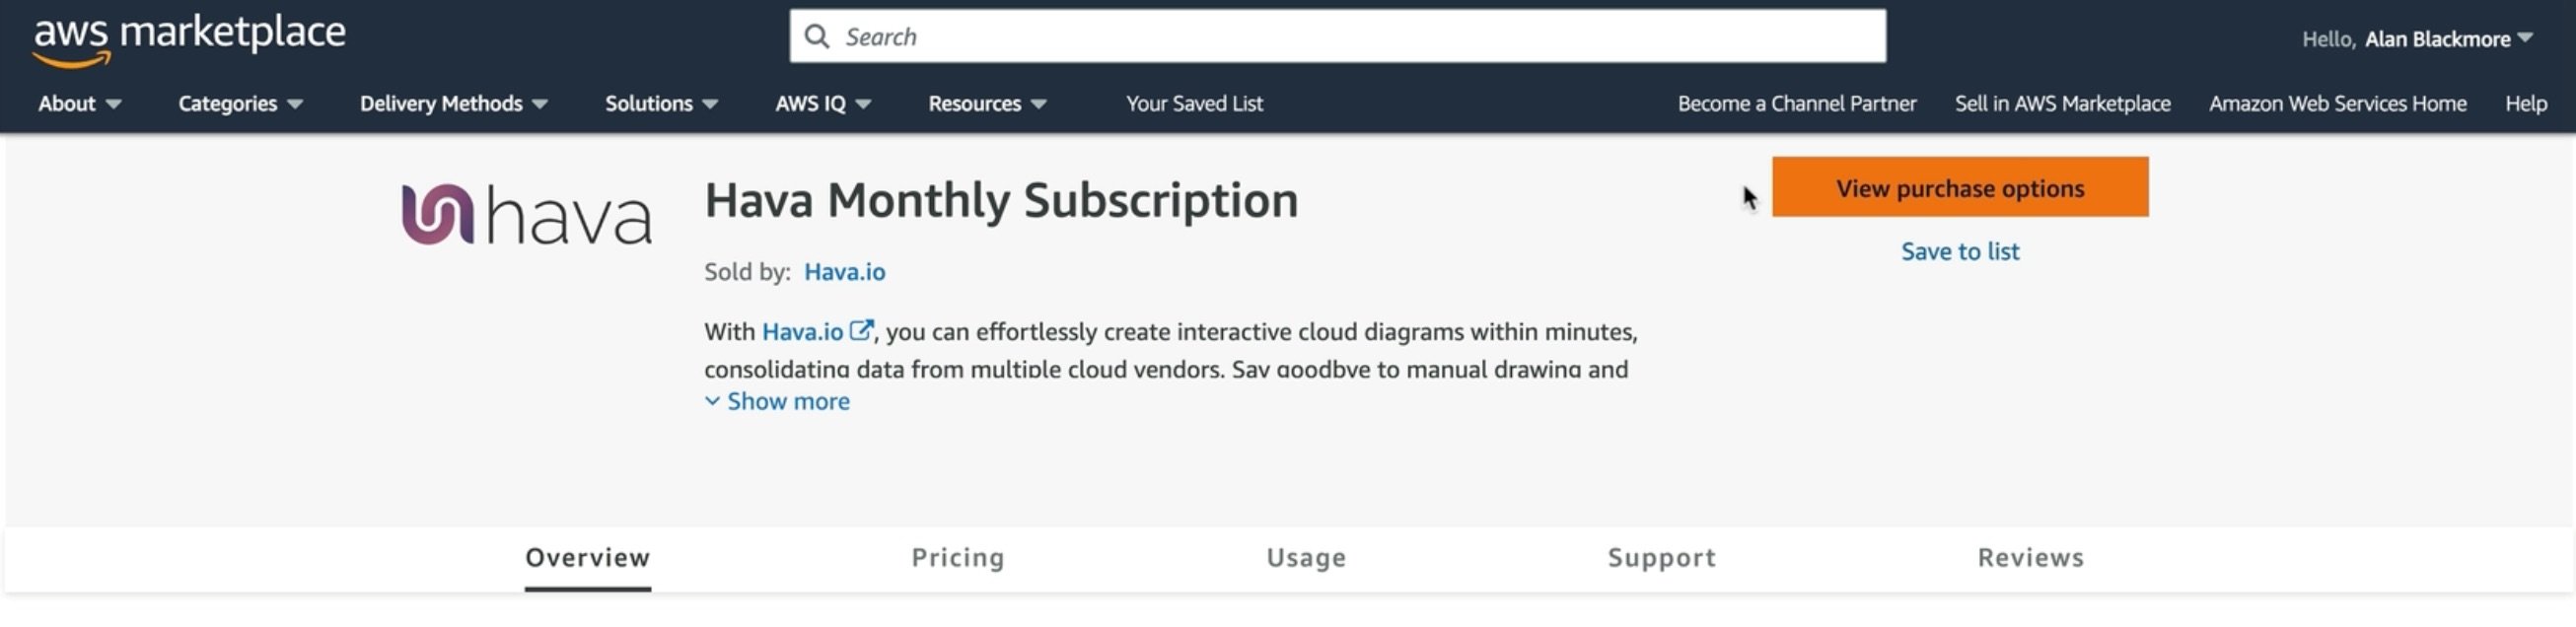 aws_marketplace_3_View_Hava_Purchase_Options